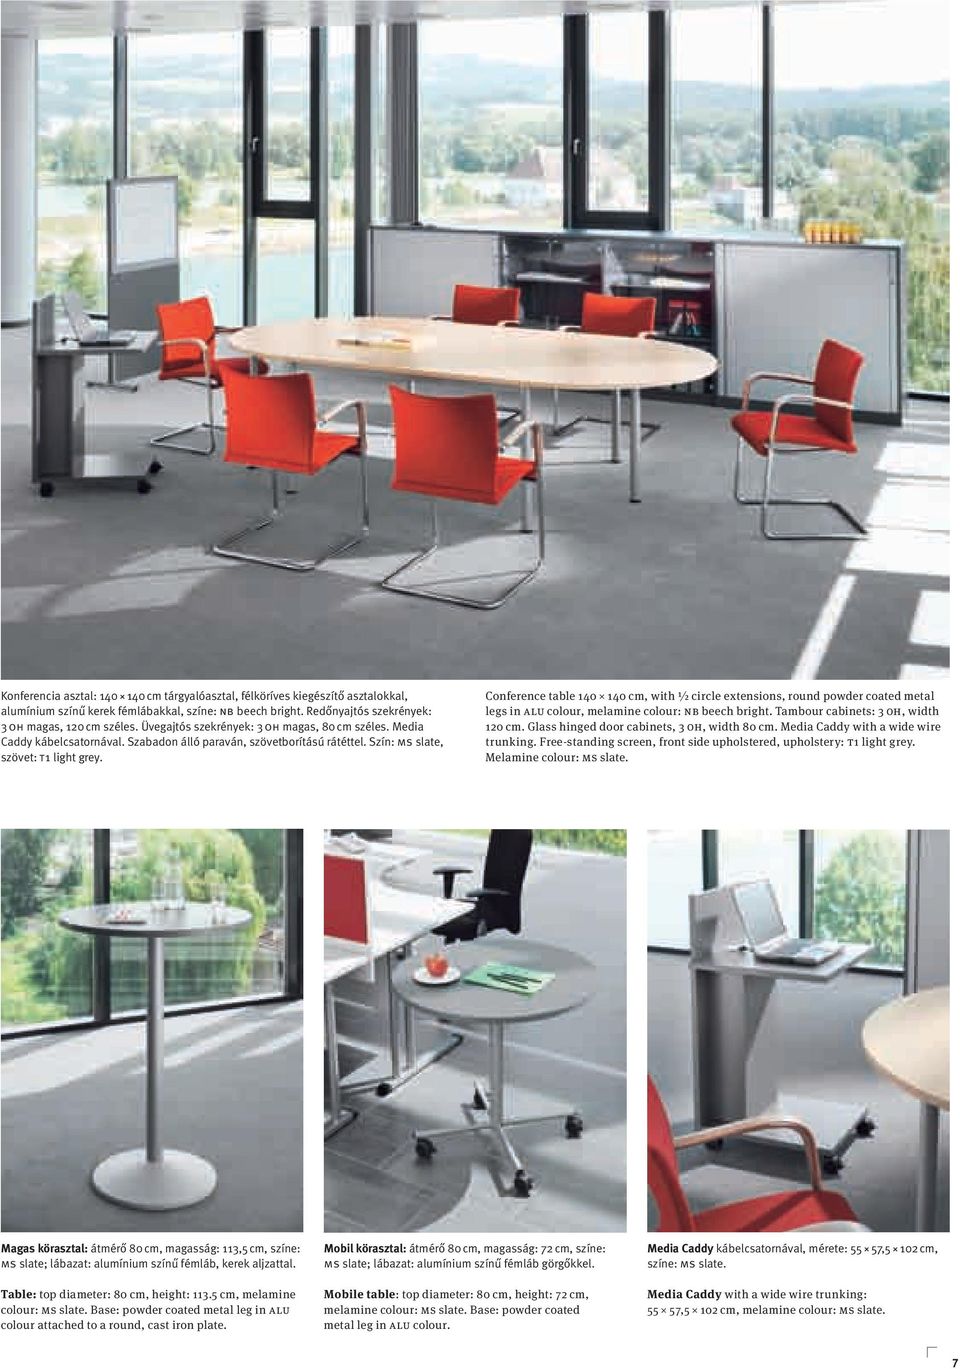 Conference table 140 140 cm, with ½ circle extensions, round powder coated metal legs in ALU colour, melamine colour: NB beech bright. Tambour cabinets: 3 OH, width 120 cm.